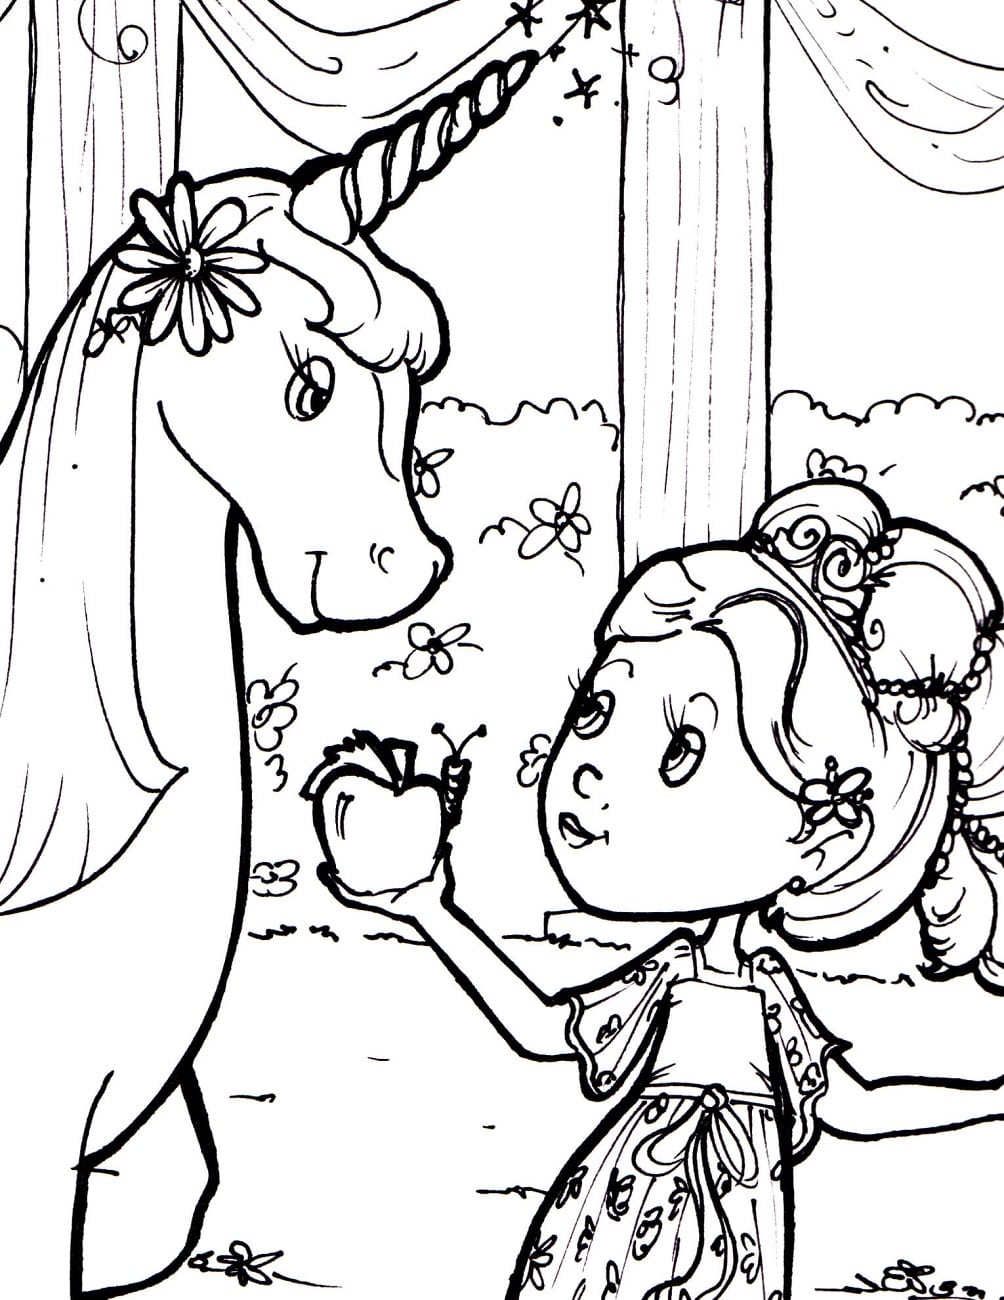 Girl Giving Apple For Unicorn Coloring Page - Free Printable Coloring